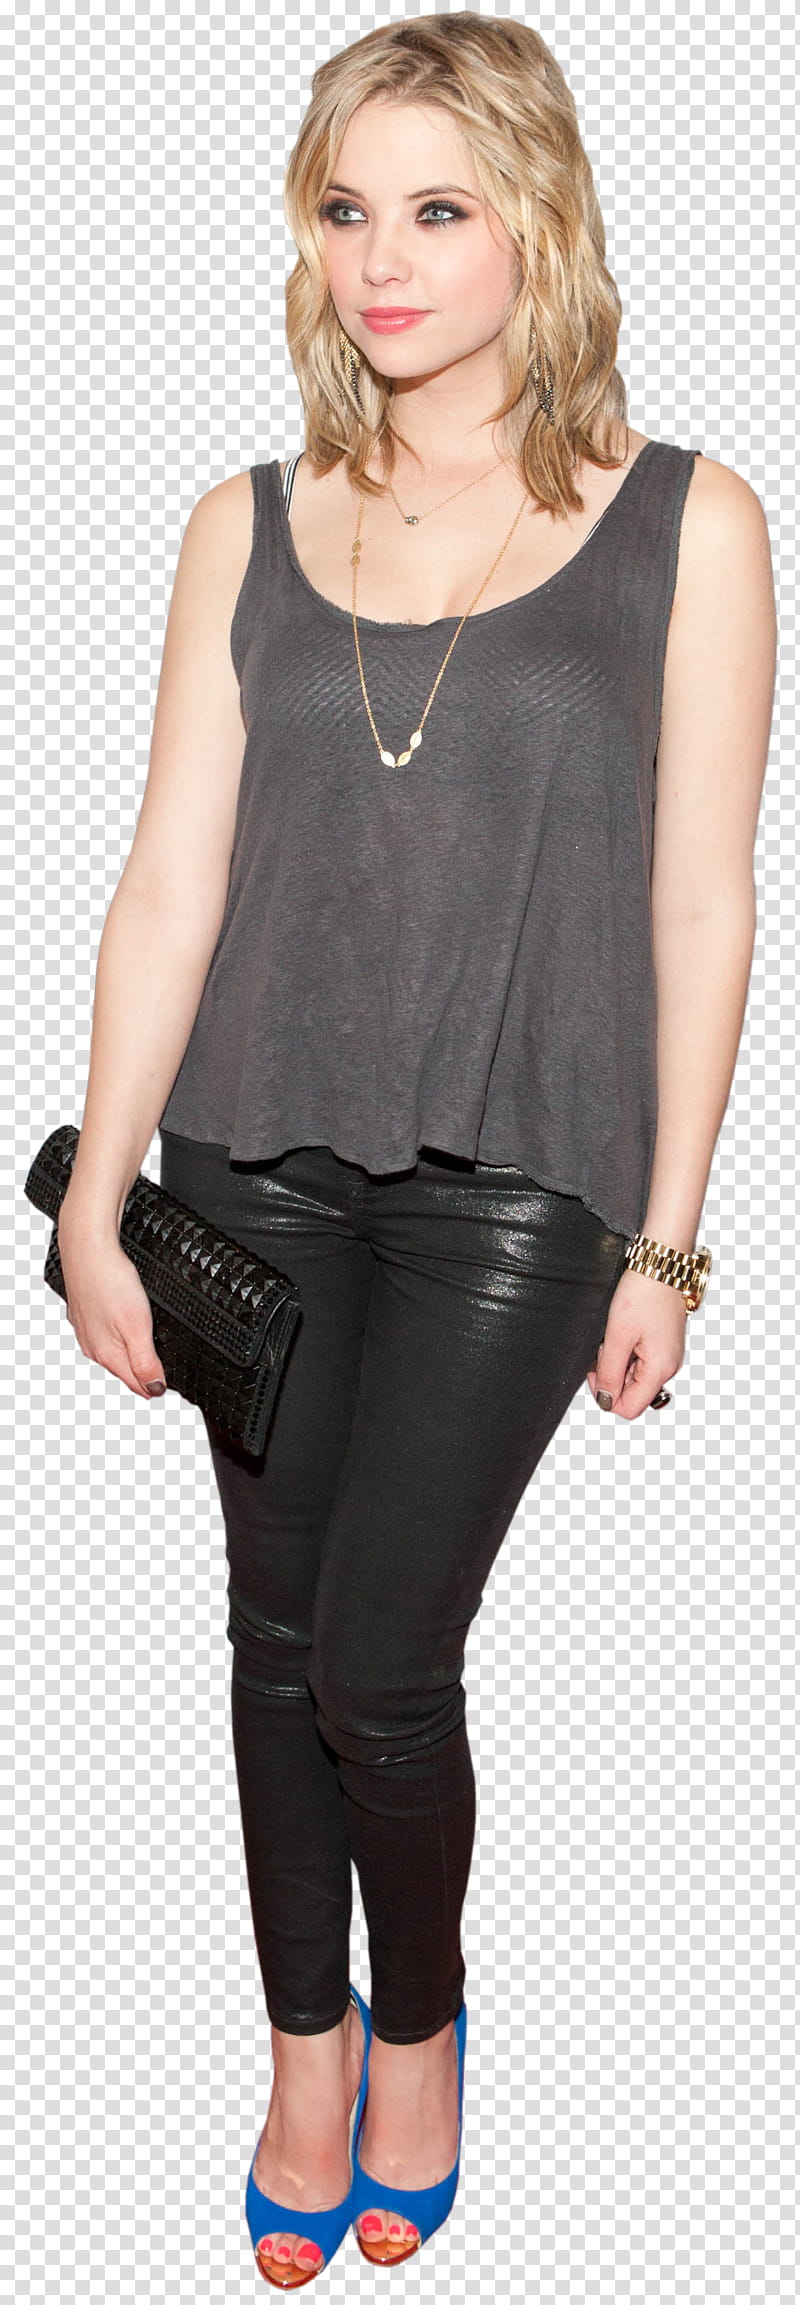 ashley benson, woman carrying black leather clutch bag transparent background PNG clipart